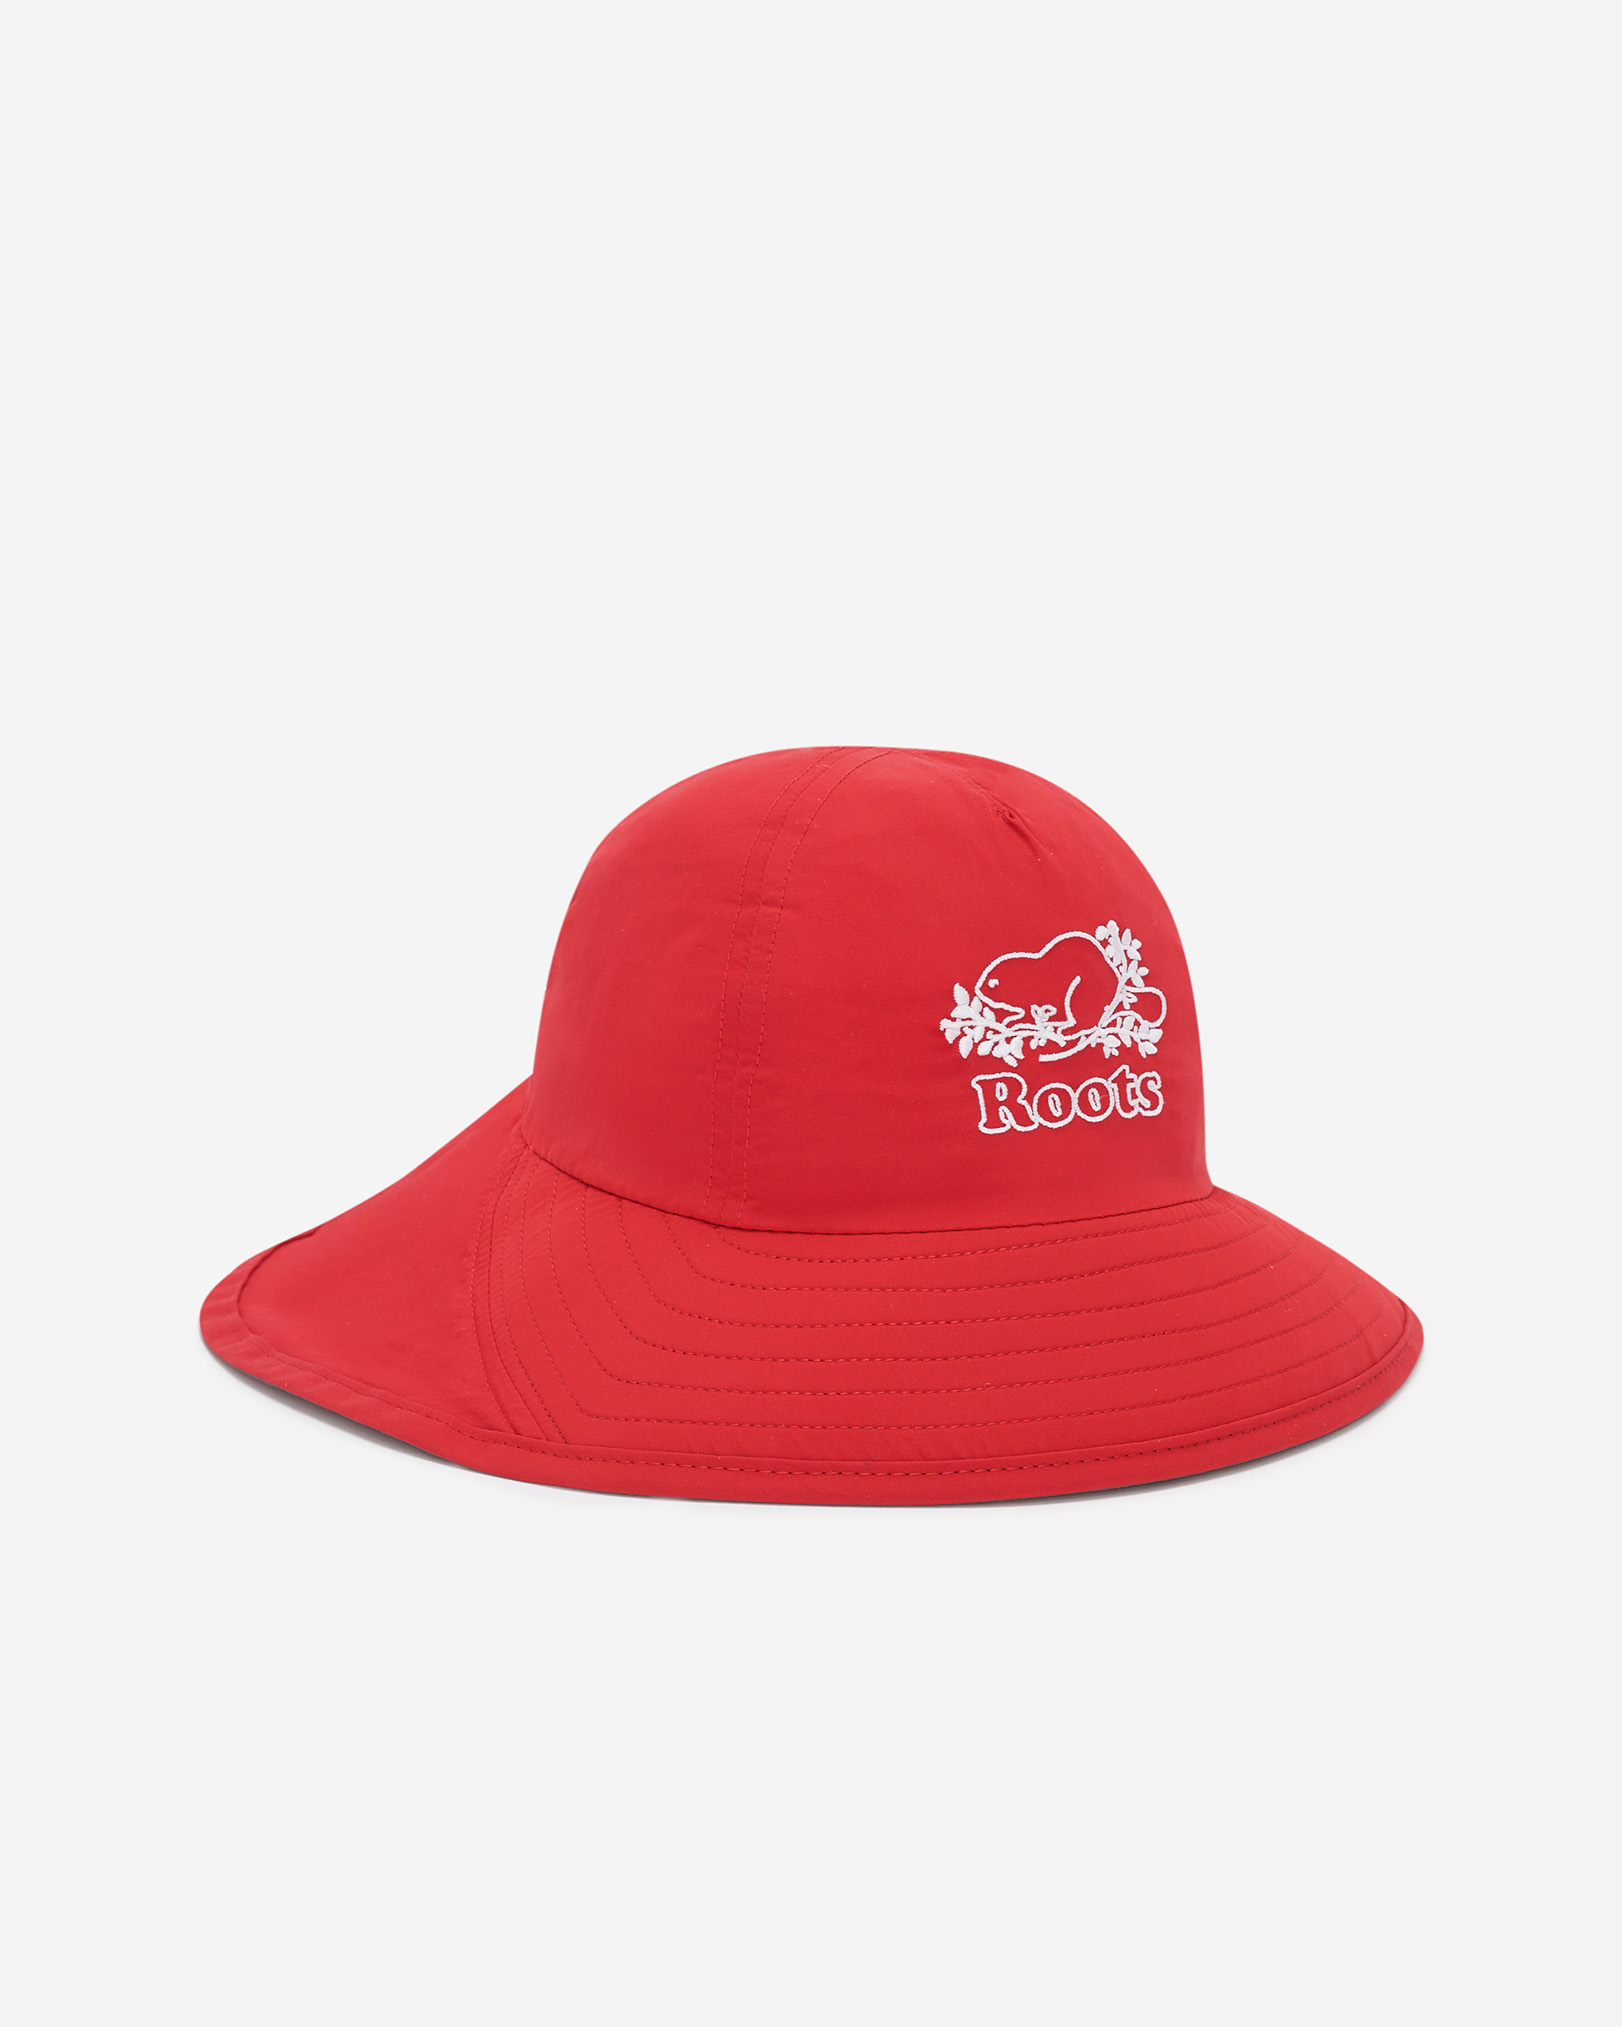 Roots Toddler Cooper Nylon Sun Hat in Jam Red